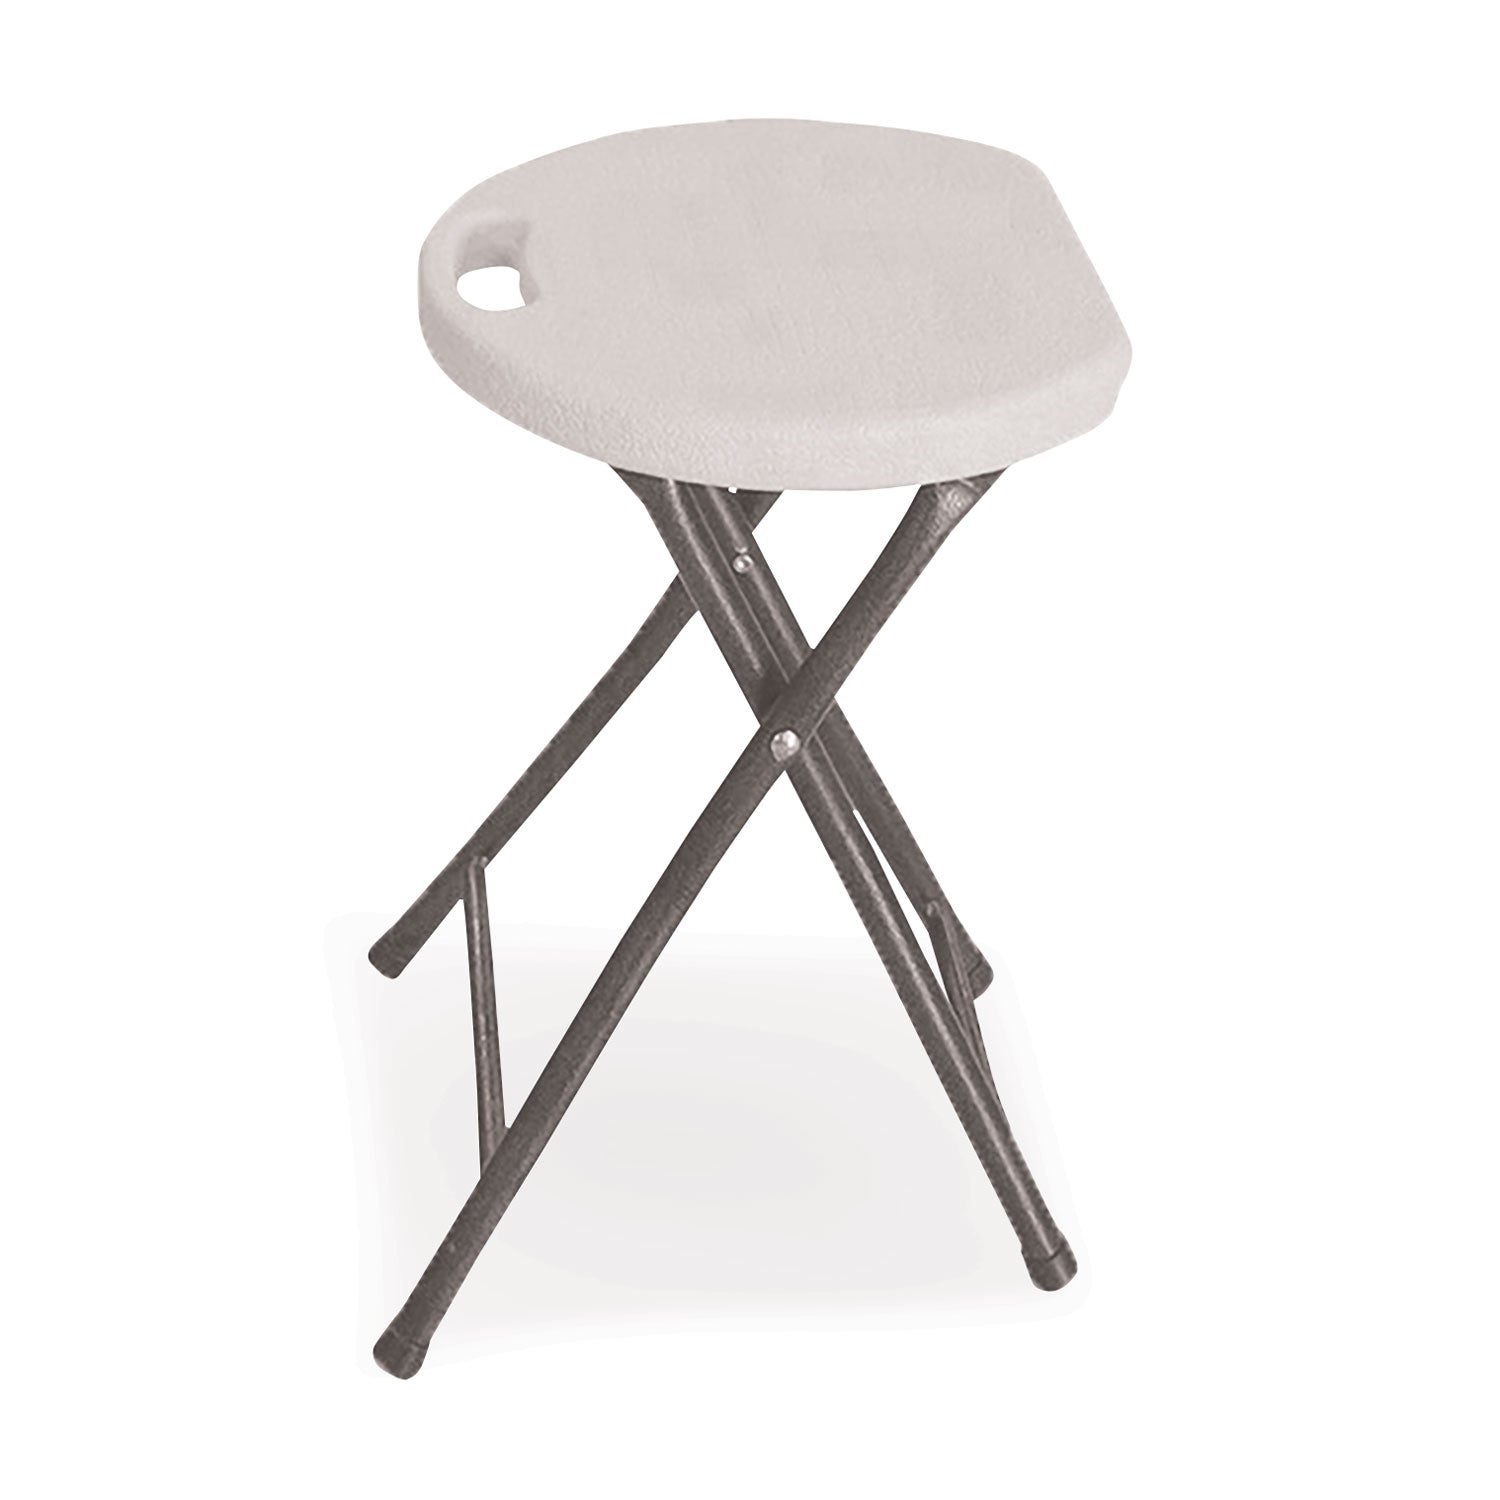 rough-n-ready-folding-stool-backless-supports-up-to-300-lb-26-seat-height-white-seat-charcoal-base-4-carton_ice64573 - 1